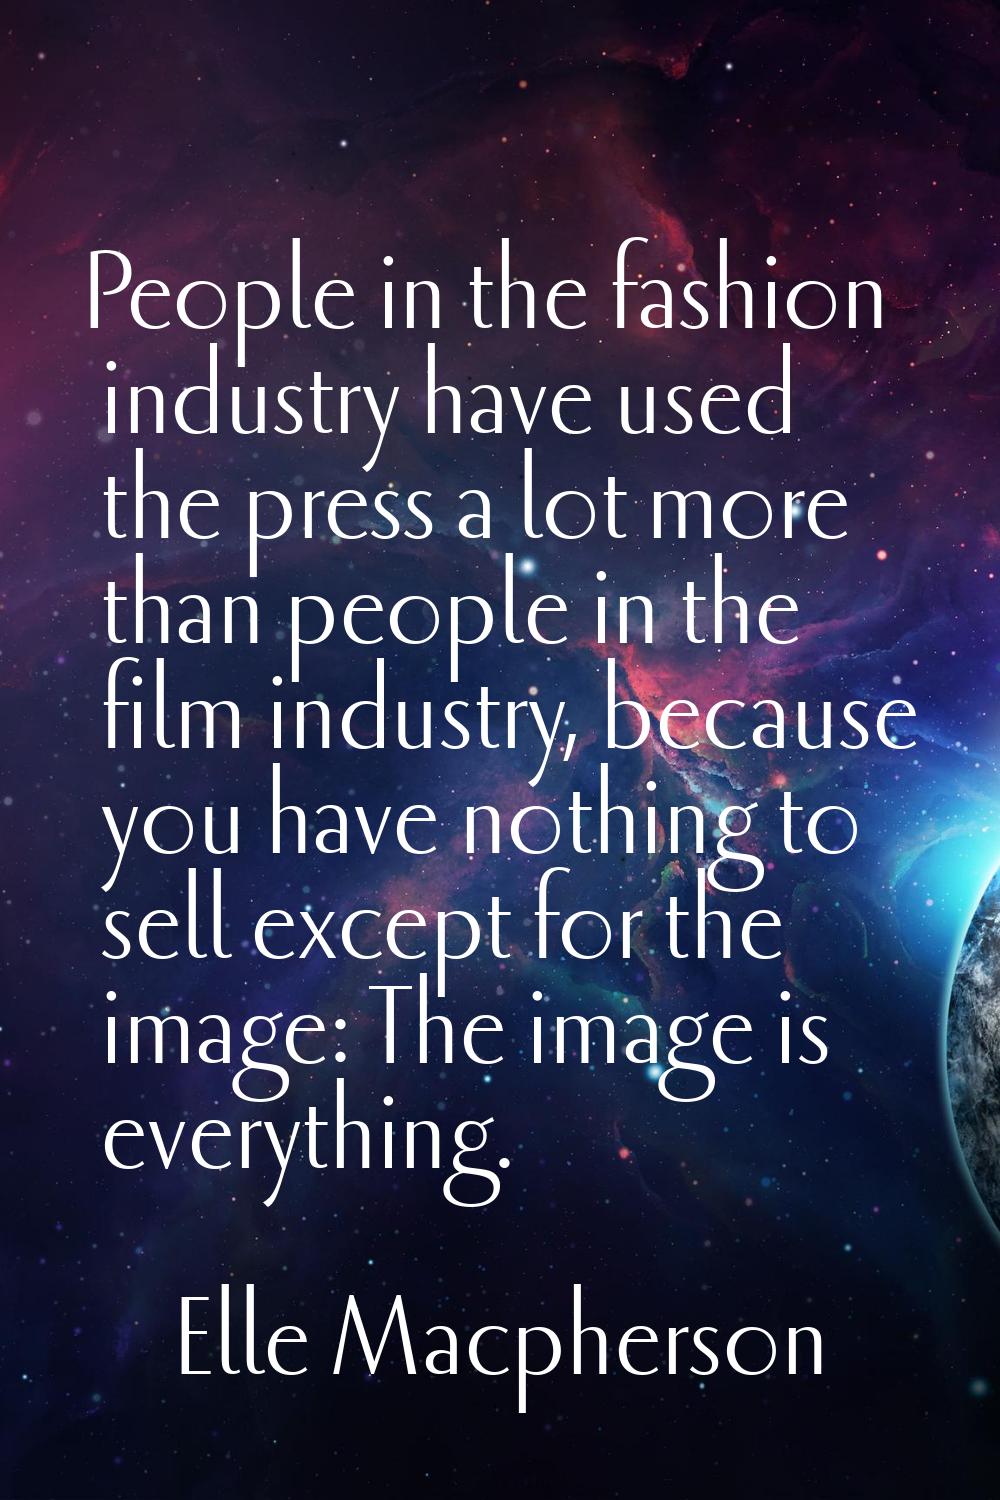 People in the fashion industry have used the press a lot more than people in the film industry, bec